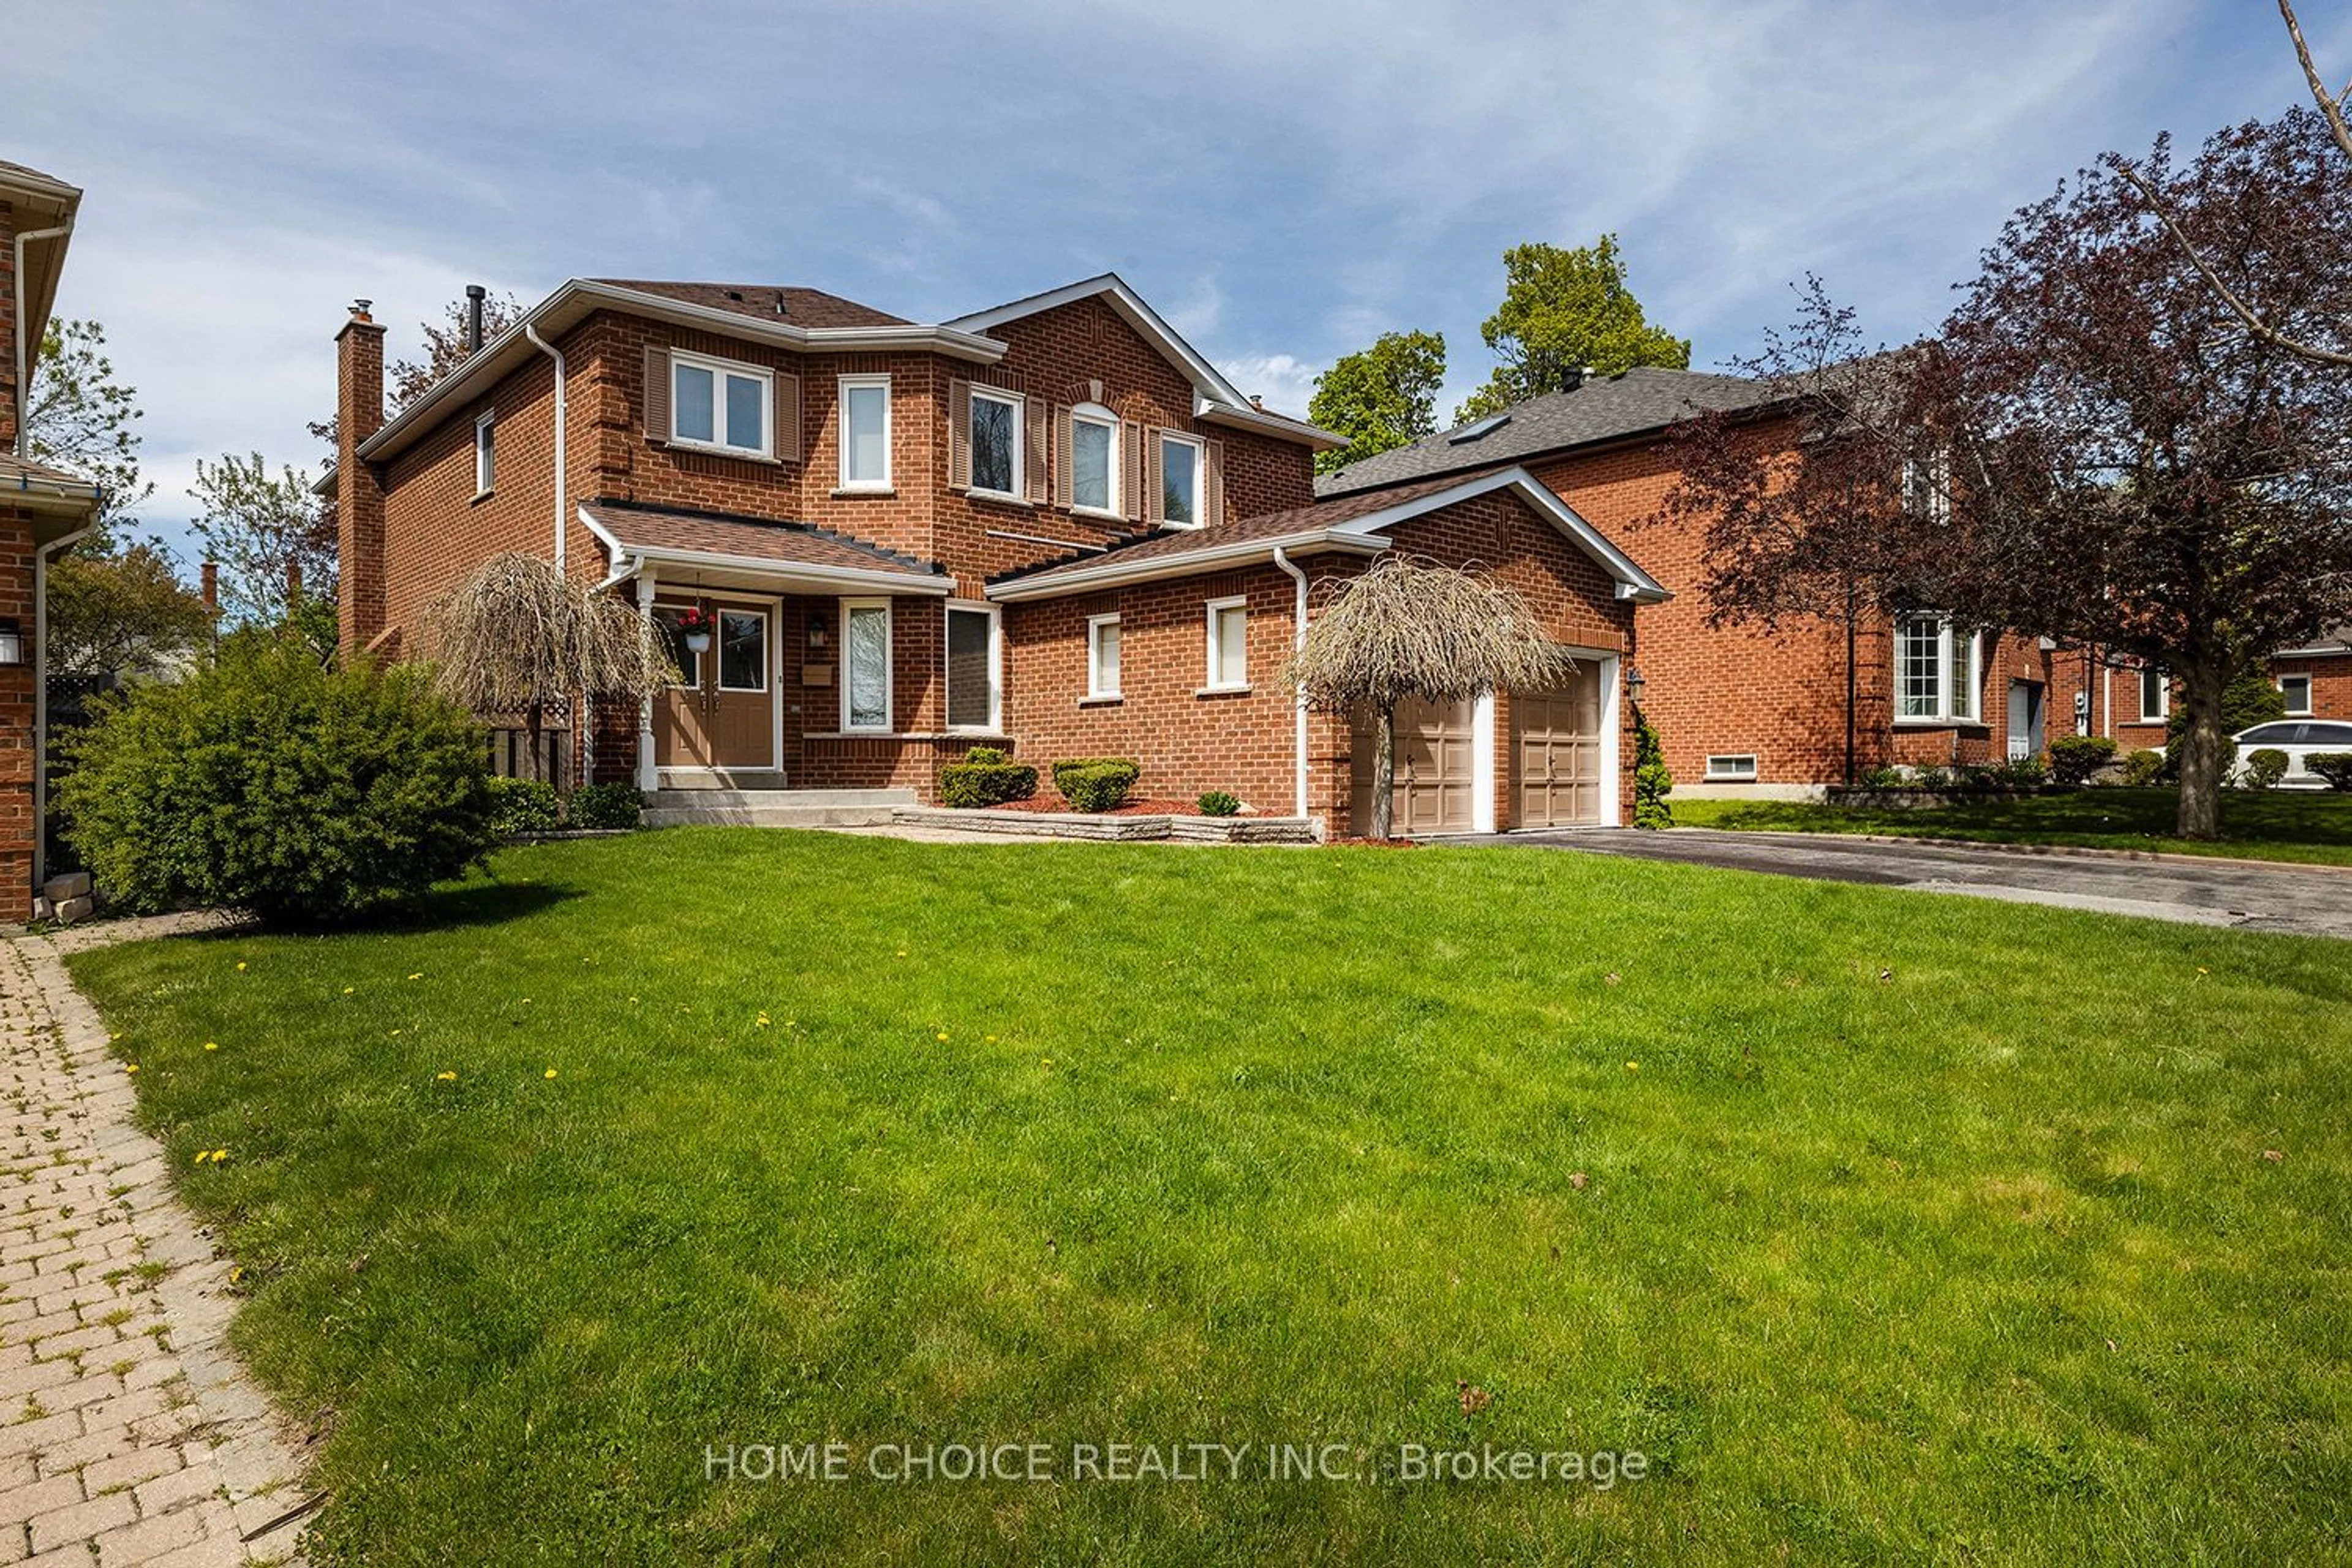 Home with brick exterior material for 18 Jamieson Cres, Whitby Ontario L1R 1T9